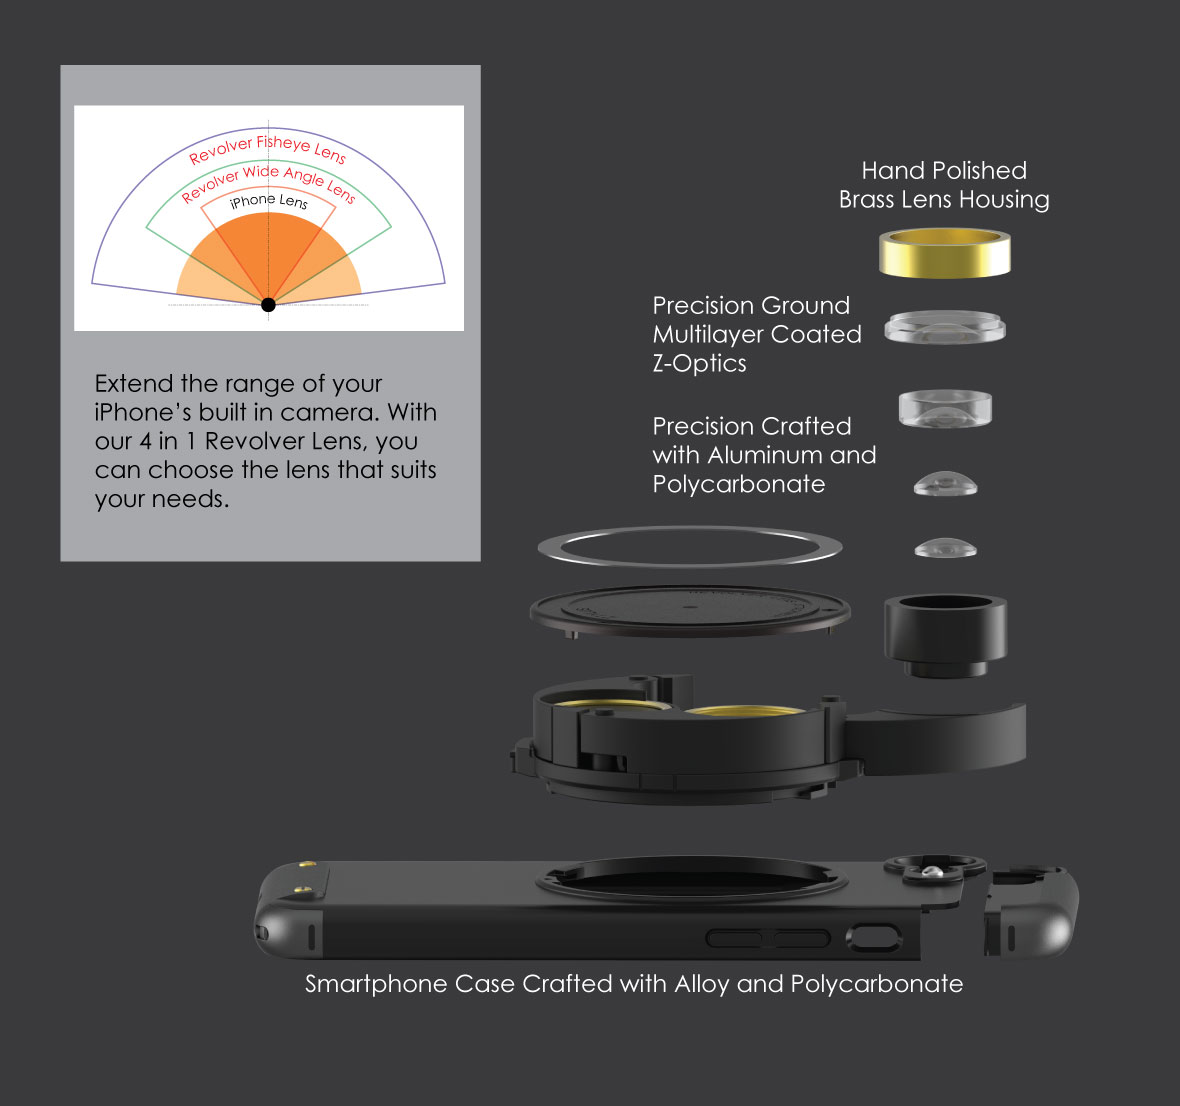 Revolver Lens Kit for iPhone 7: Extend the range of your iPhone’s built in camera. With our 4 in 1 Revolver Lens, you can choose the lens that suits your needs.  